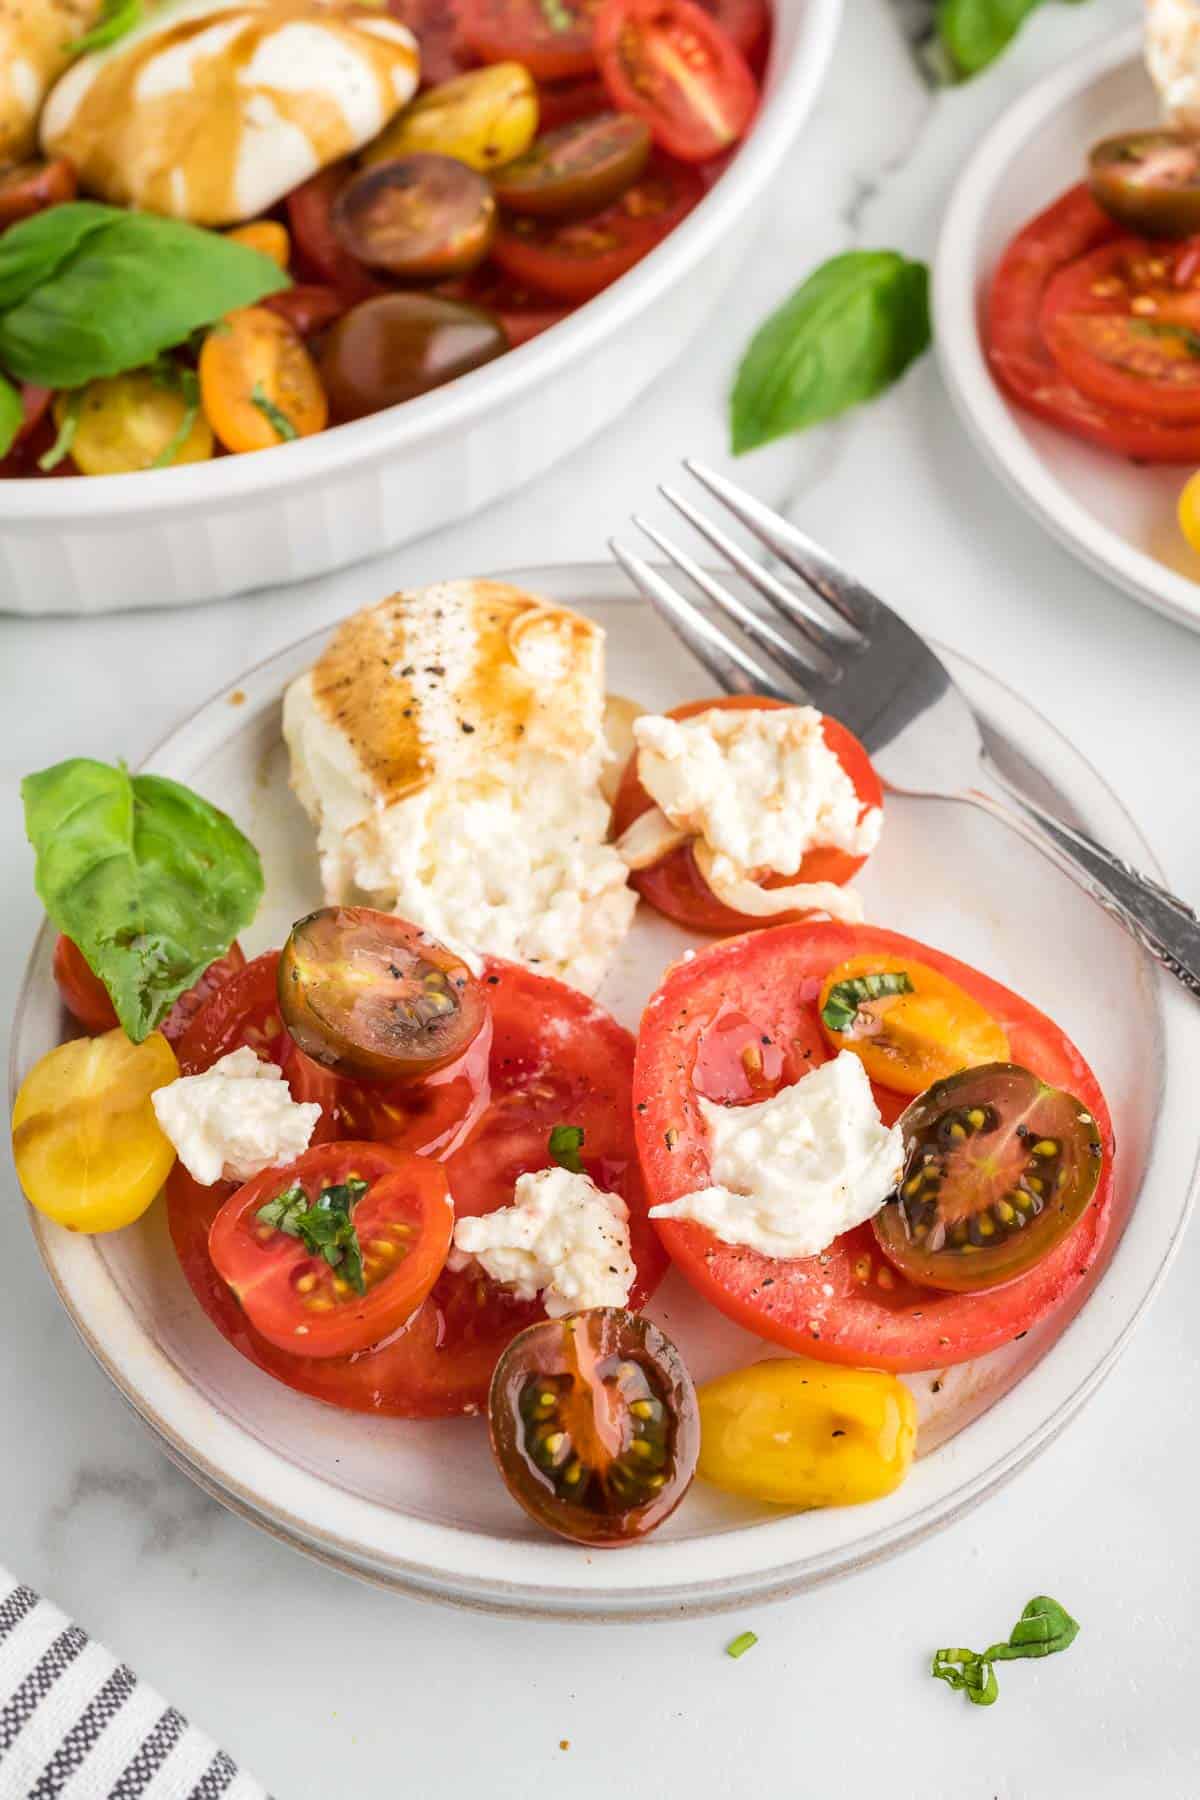 A white plate filled with a portion of burrata caprese salade.